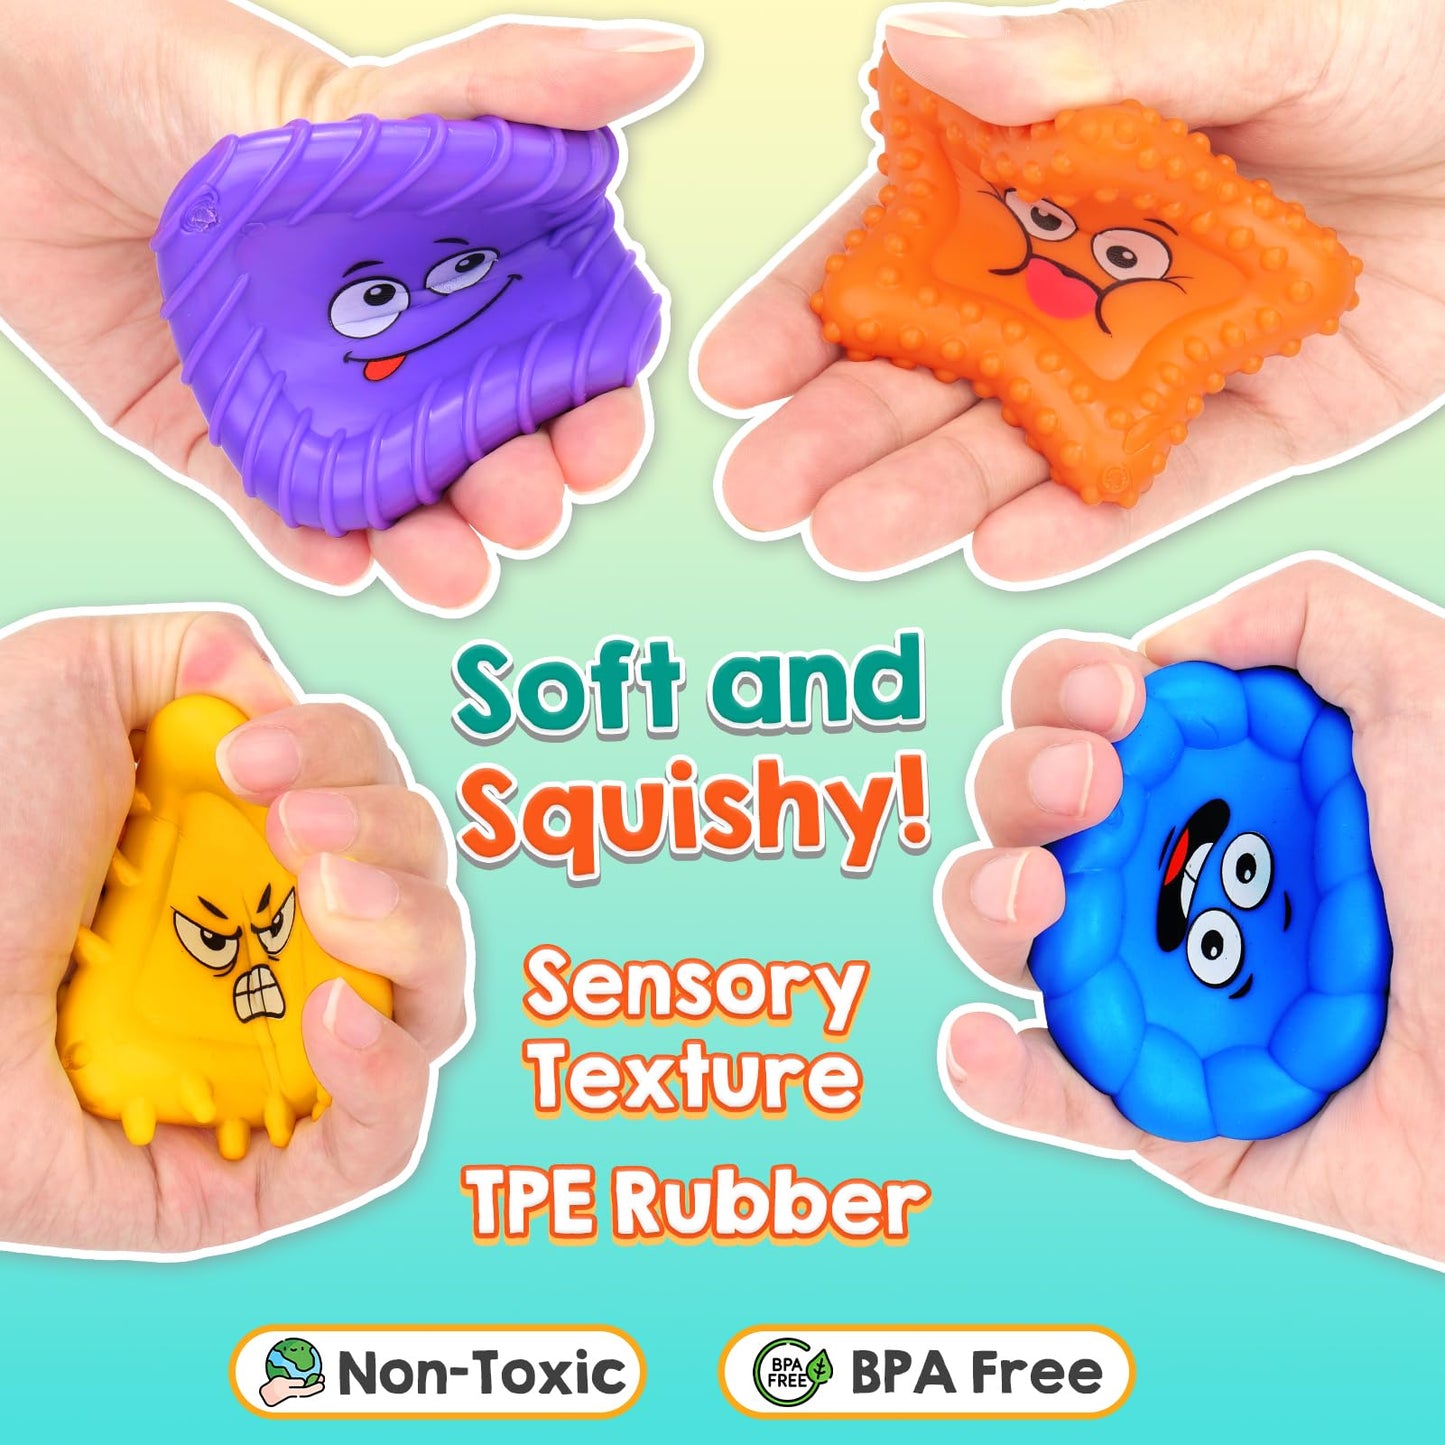 Sensory Toys for Kids Toddlers - Social Emotional Feelings Toys for Special Needs, Texture Shapes Learning Tactile Toy Preschool Classroom Must Haves, Calm Down Sensory Toys for Autistic Children